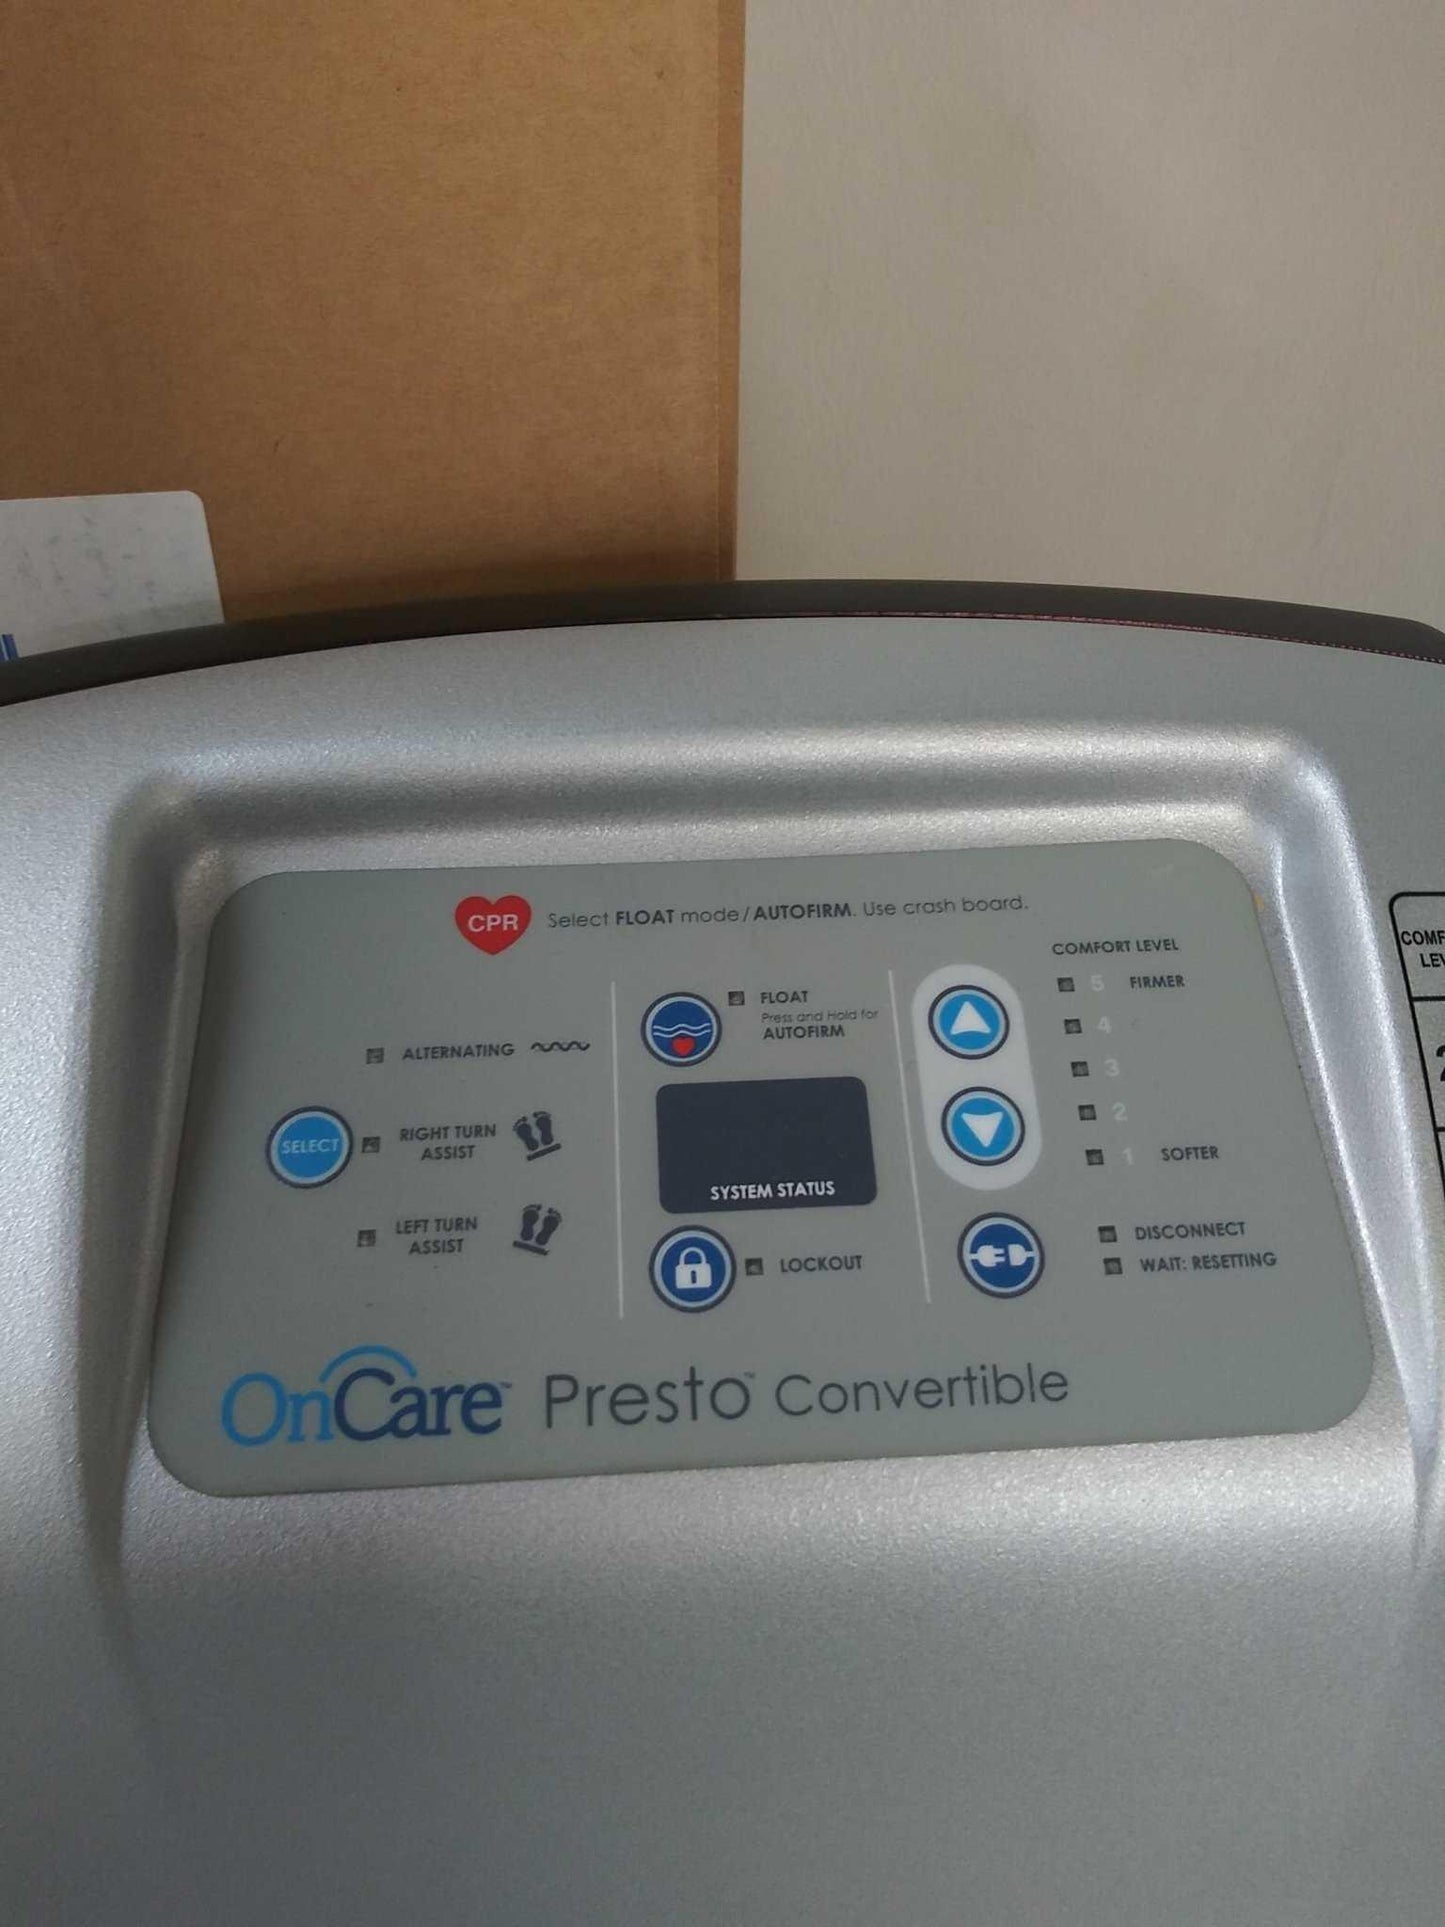 NEW OnCare Presto Convertible Air-and Foam Hybrid Mattress Pump Model 8800 Warranty FREE Shipping - MBR Medicals